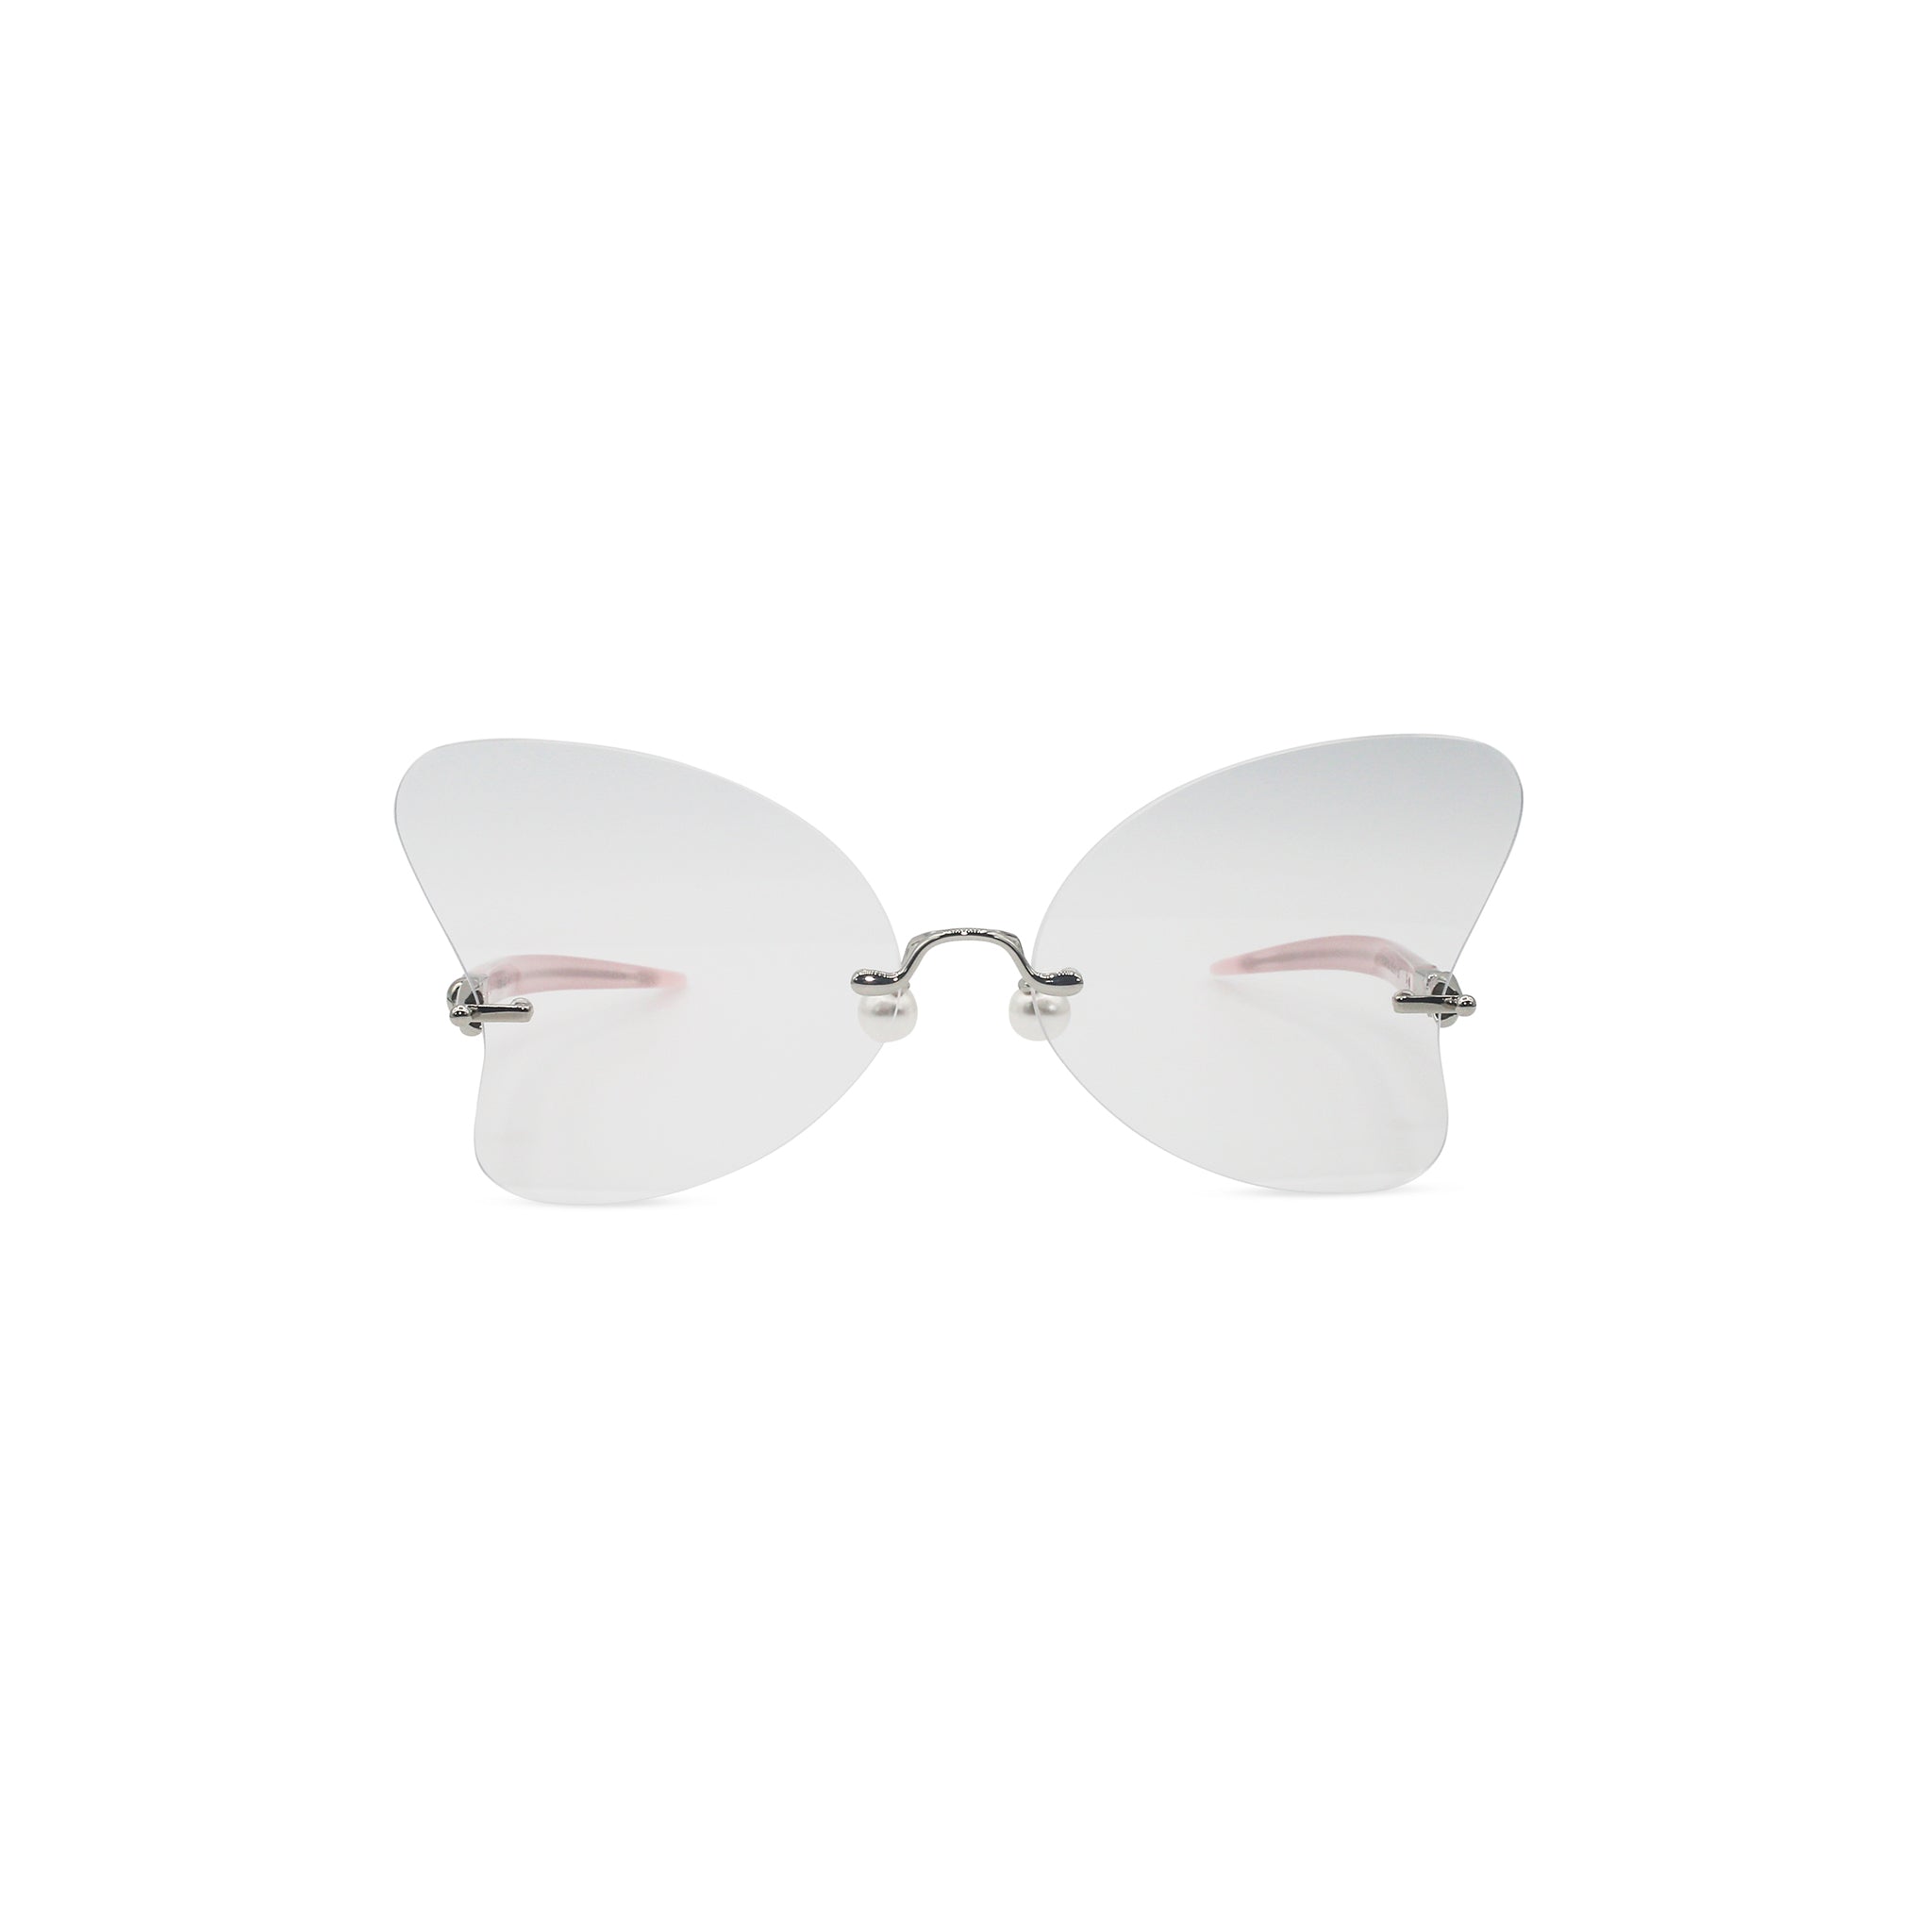 Percy Lau Dada Child Heart Sunglasses in clear on Well(un)known Available at wellunknown.com